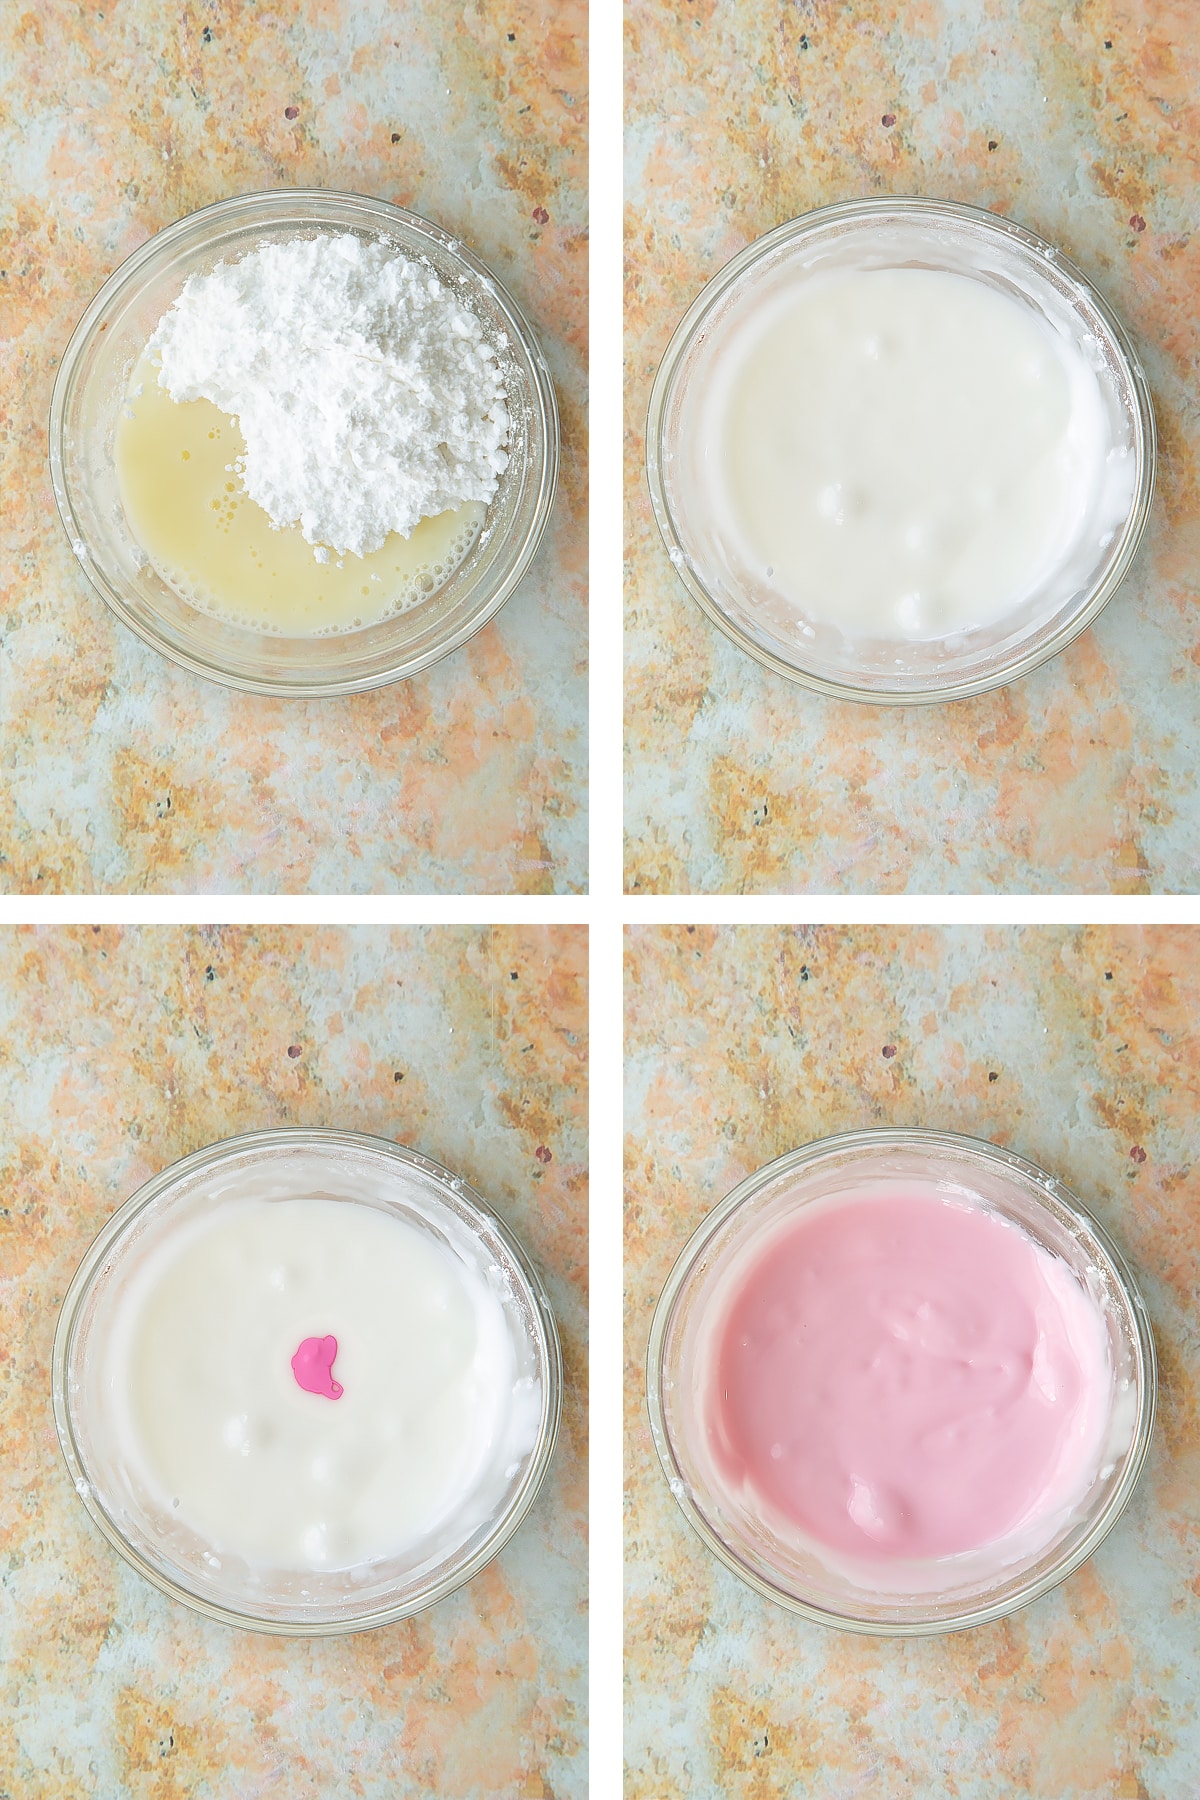 Gallary image showing the process of creating the pink icing sugar.